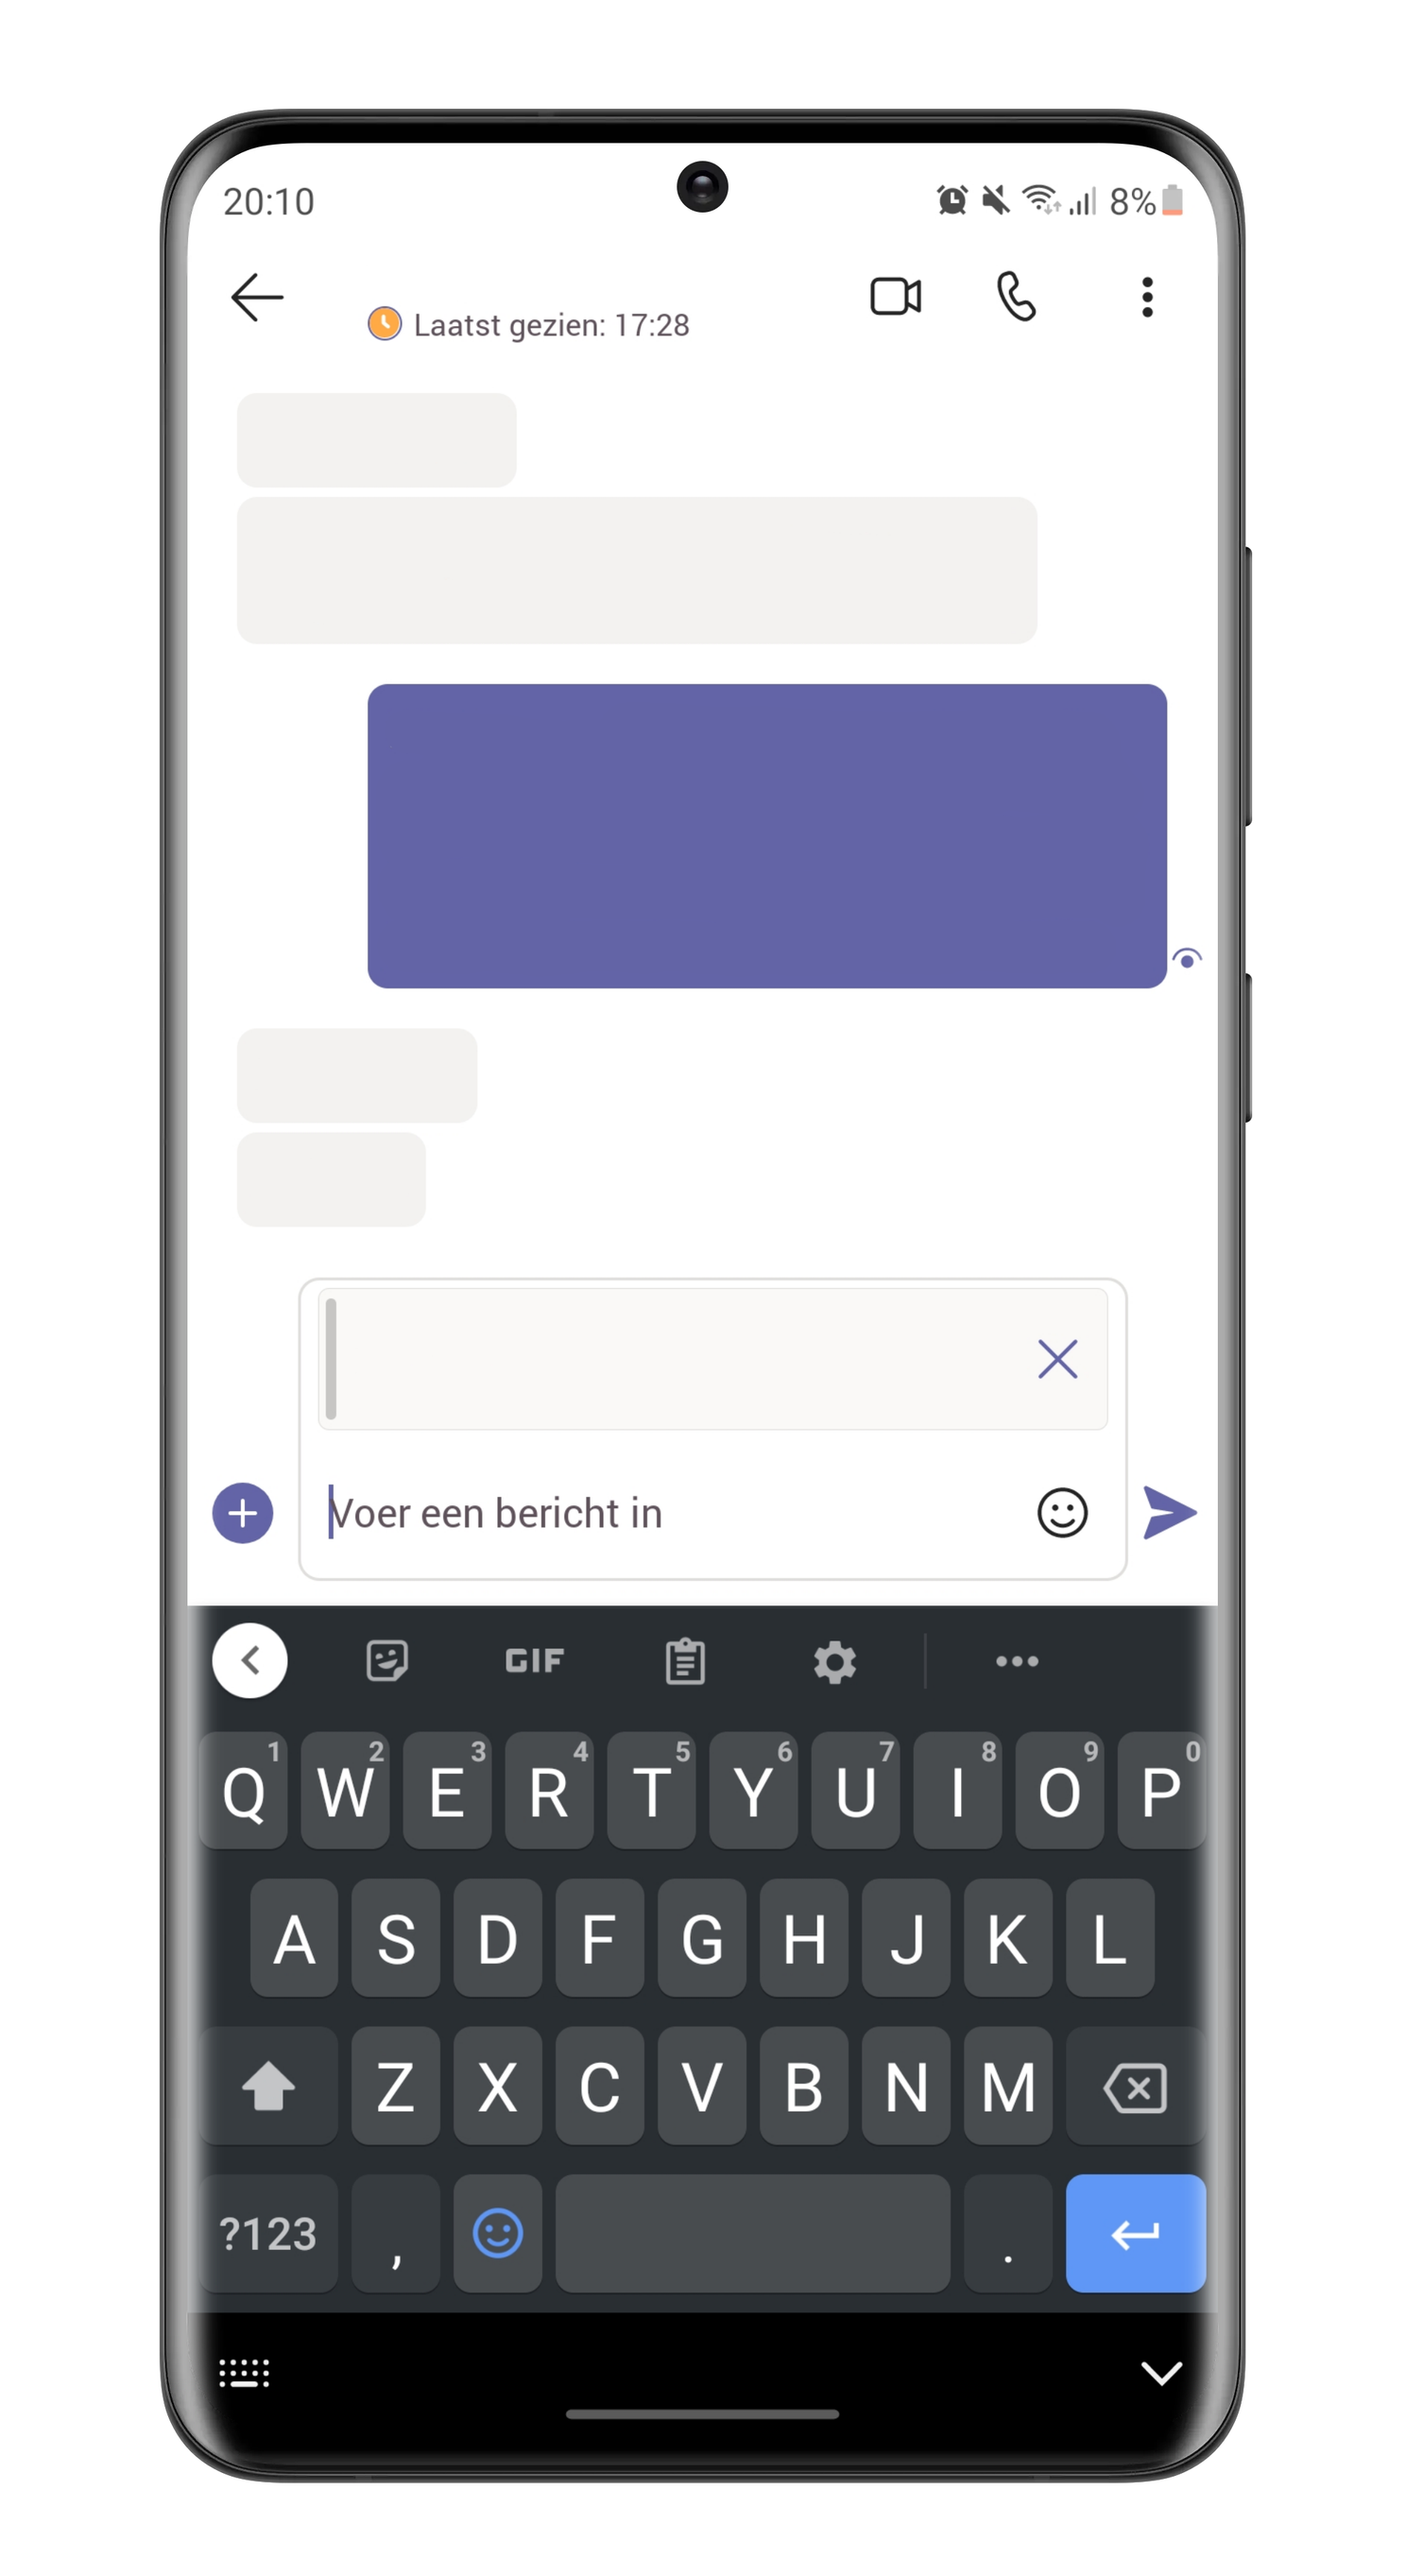 Microsoft Teams for Android: these are the 8 best tips and tricks